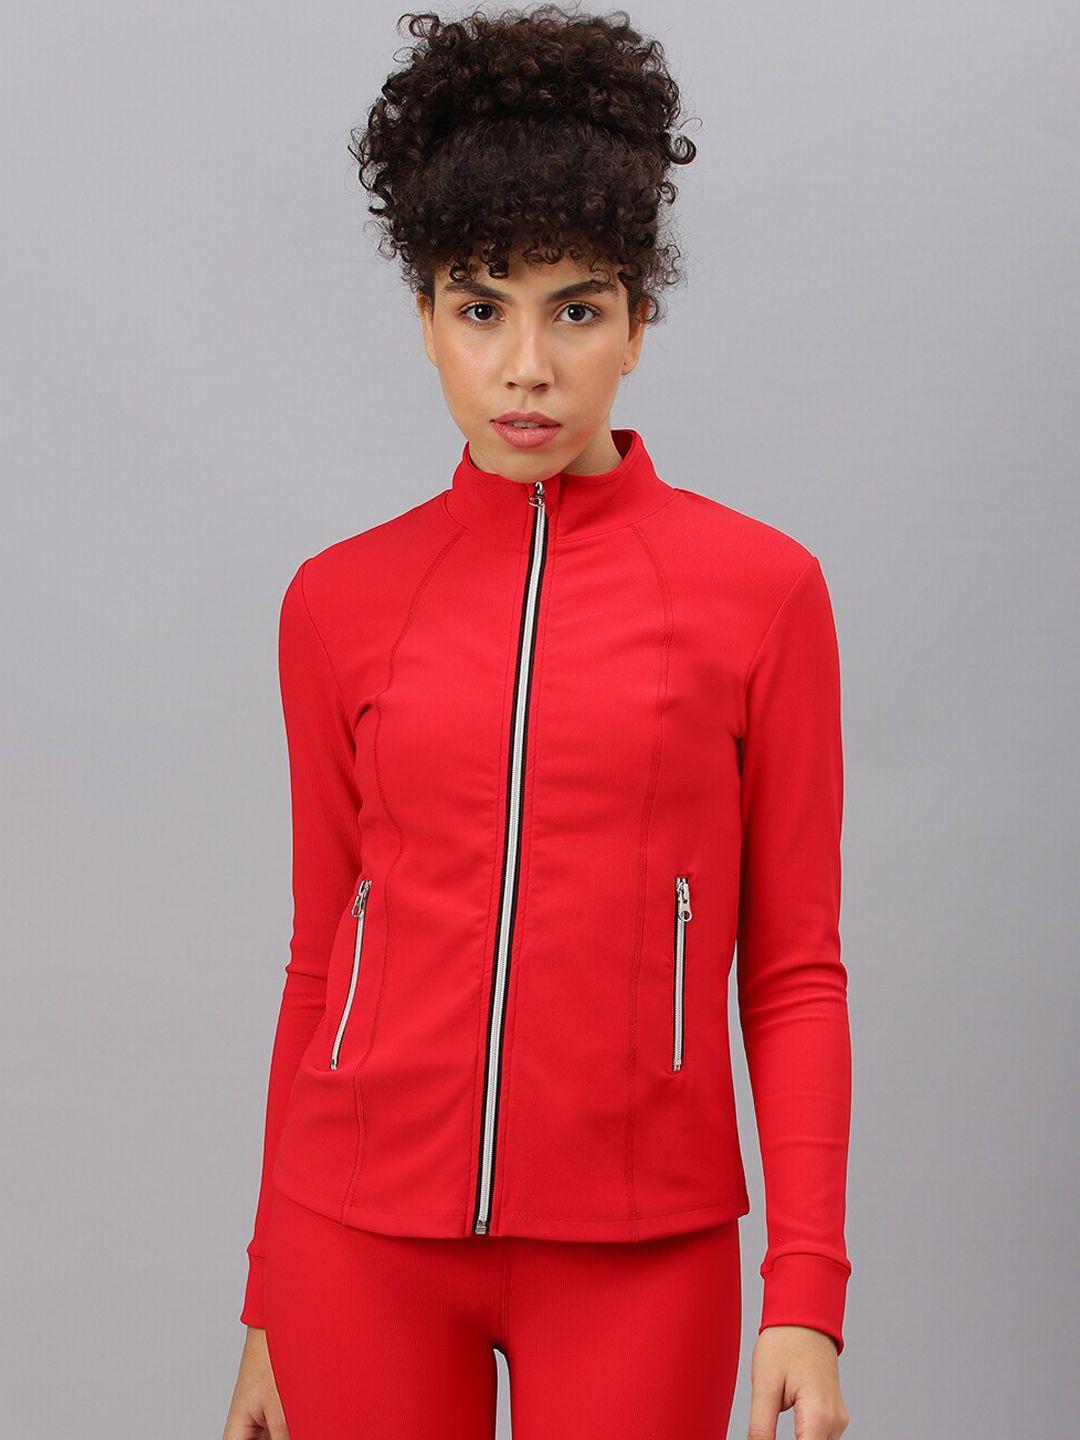 fitkin women lightweight training or gym sporty jacket